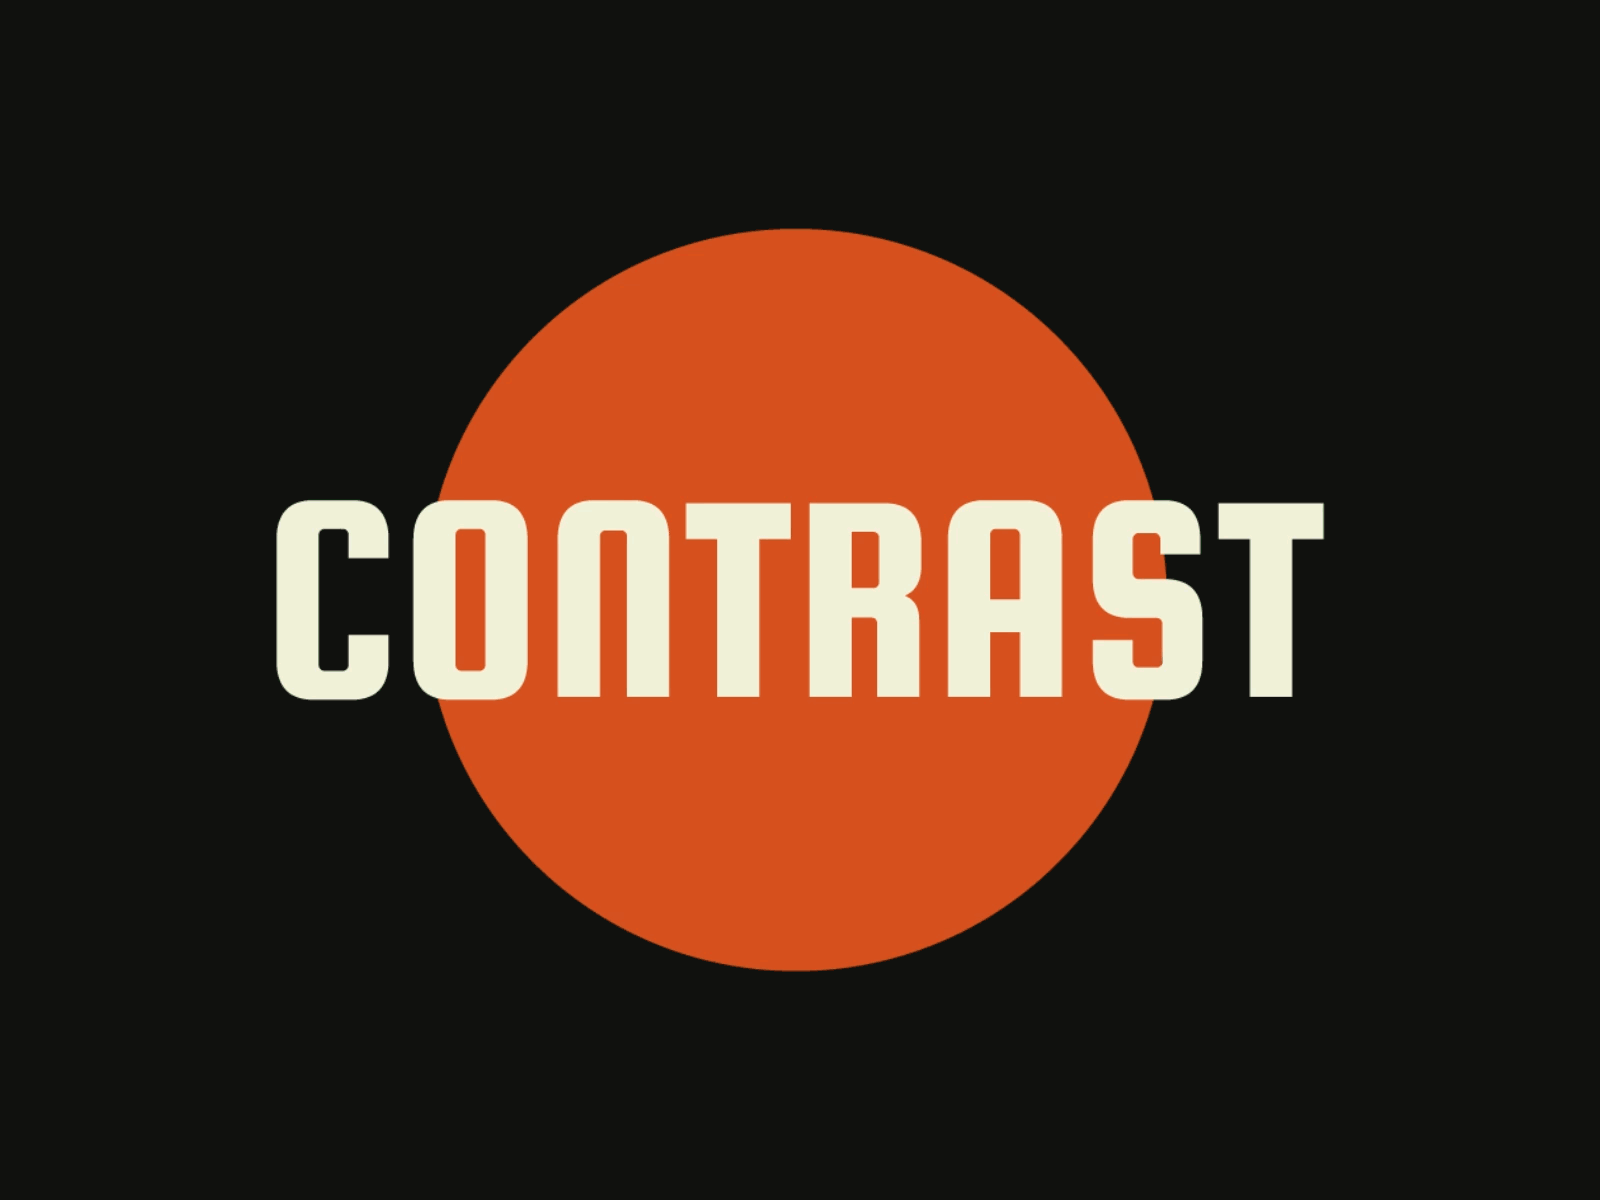 Design Principles Animation — Contrast by Mike Davies on Dribbble